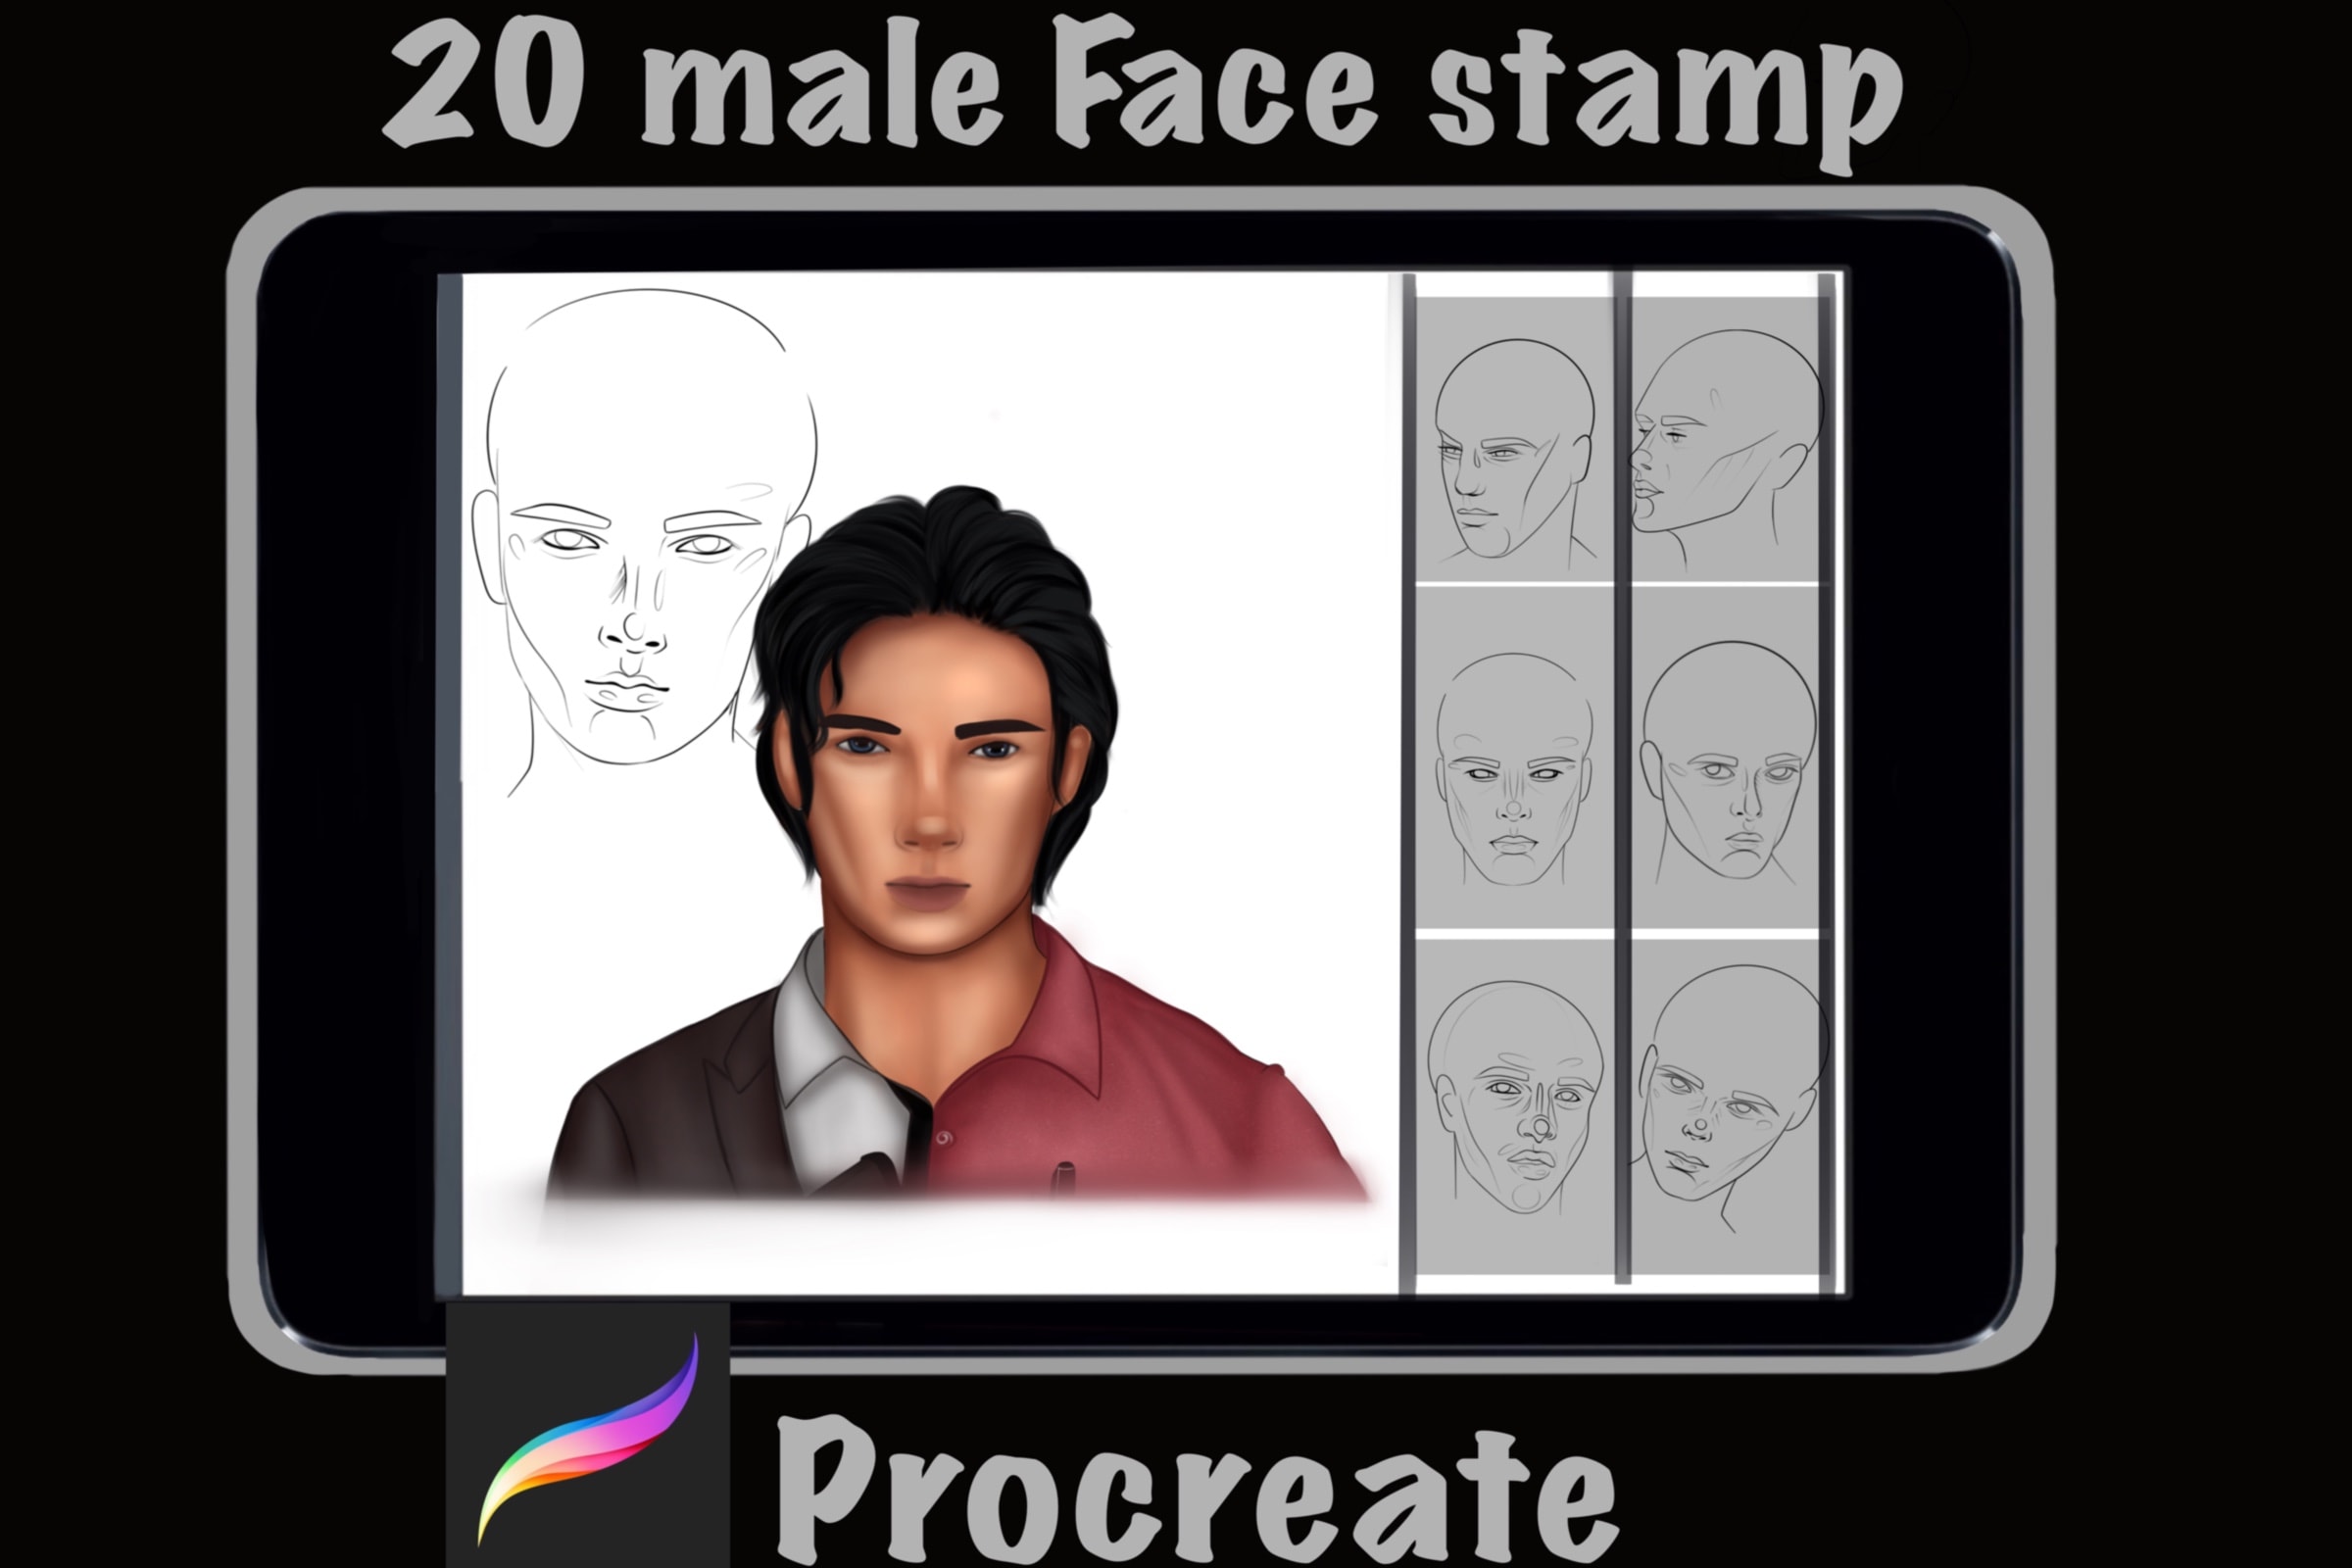 Male face stamp brushes (set of 20)